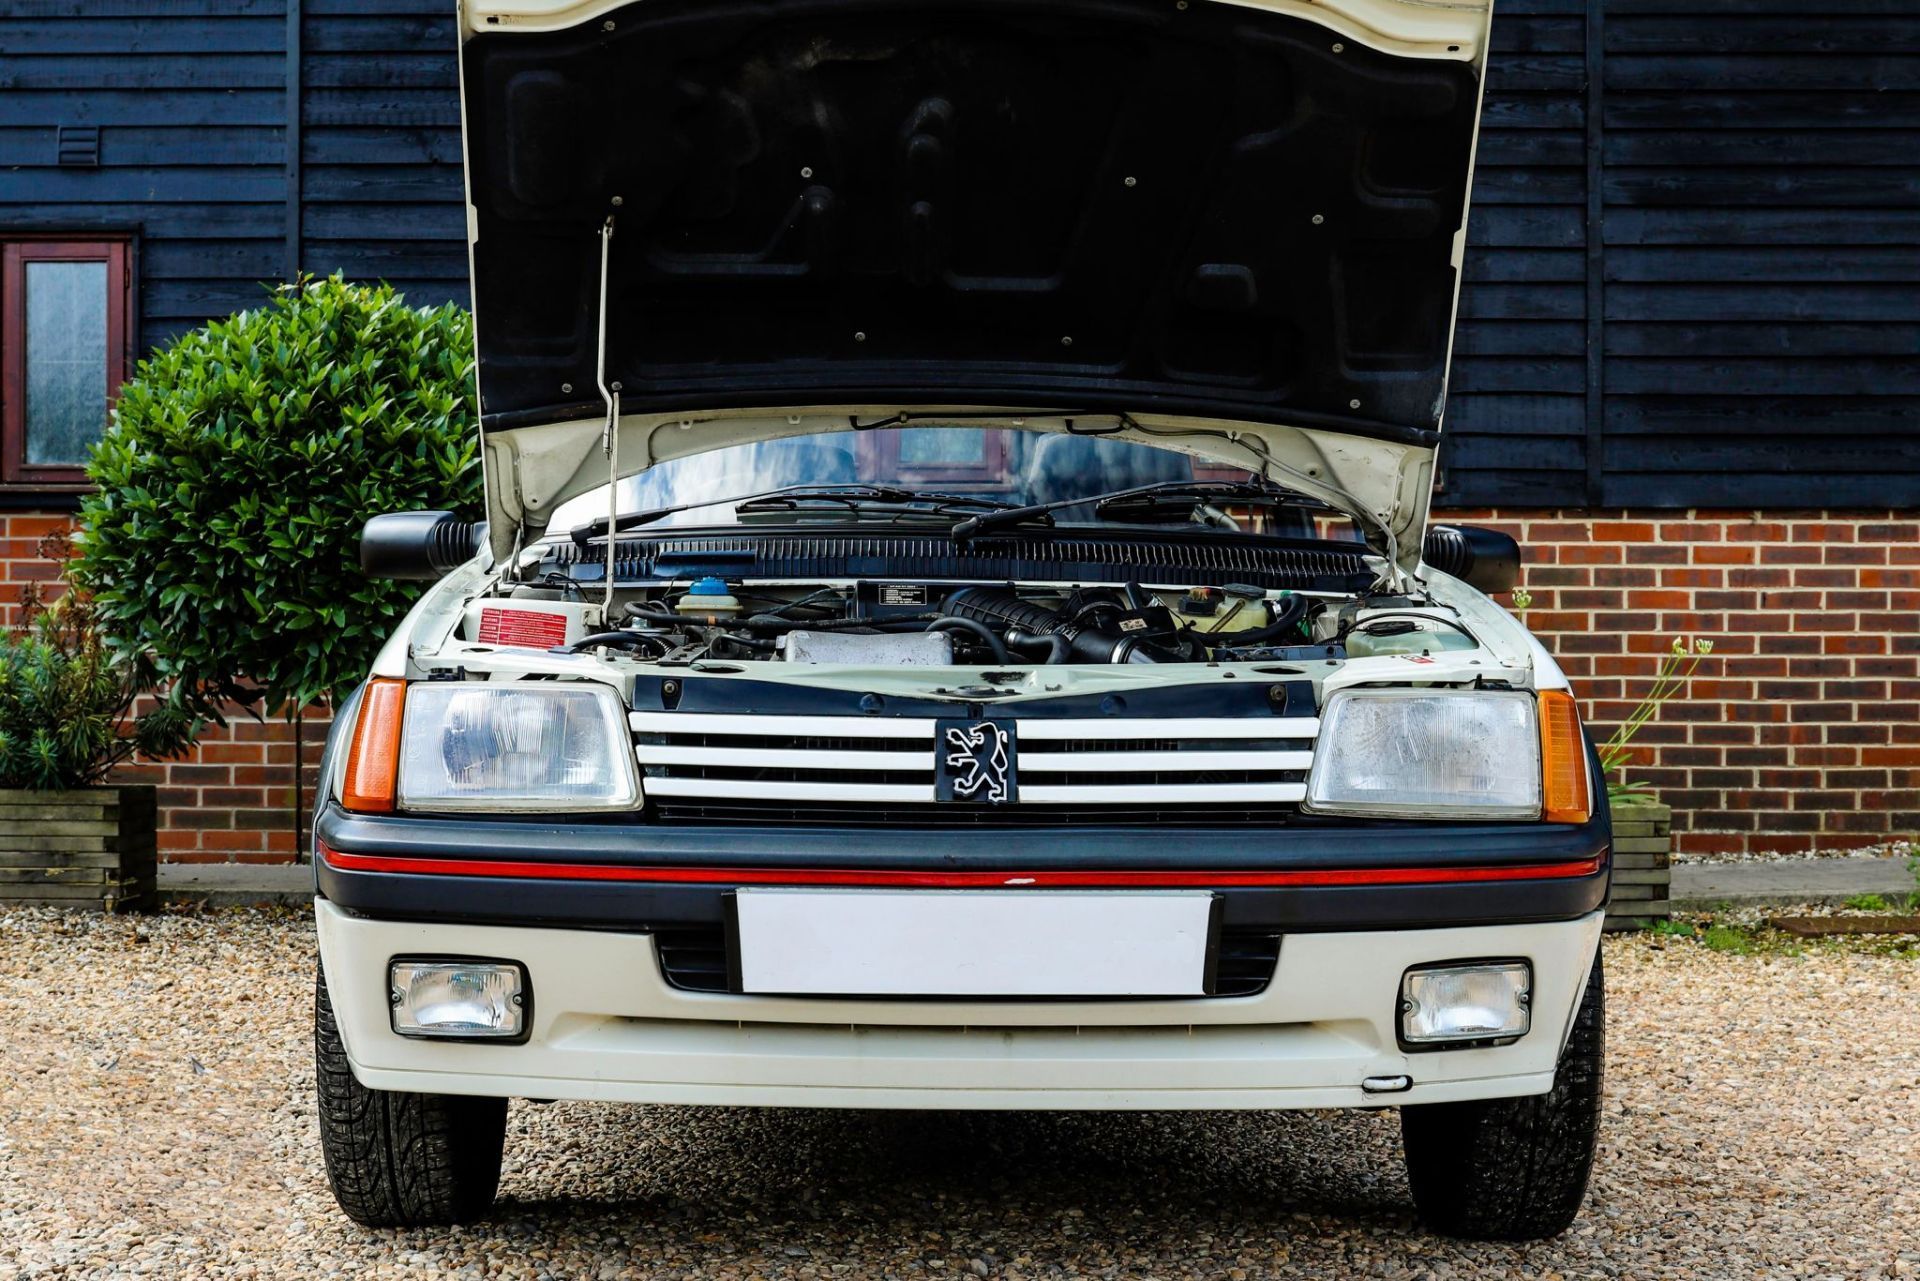 1989 PEUGEOT 205 CTI CABRIOLET CONVERTIBLE, 115hp, 1590cc PETROL ENGINE - OVER 30 SERVICES RECORDED - Image 2 of 12